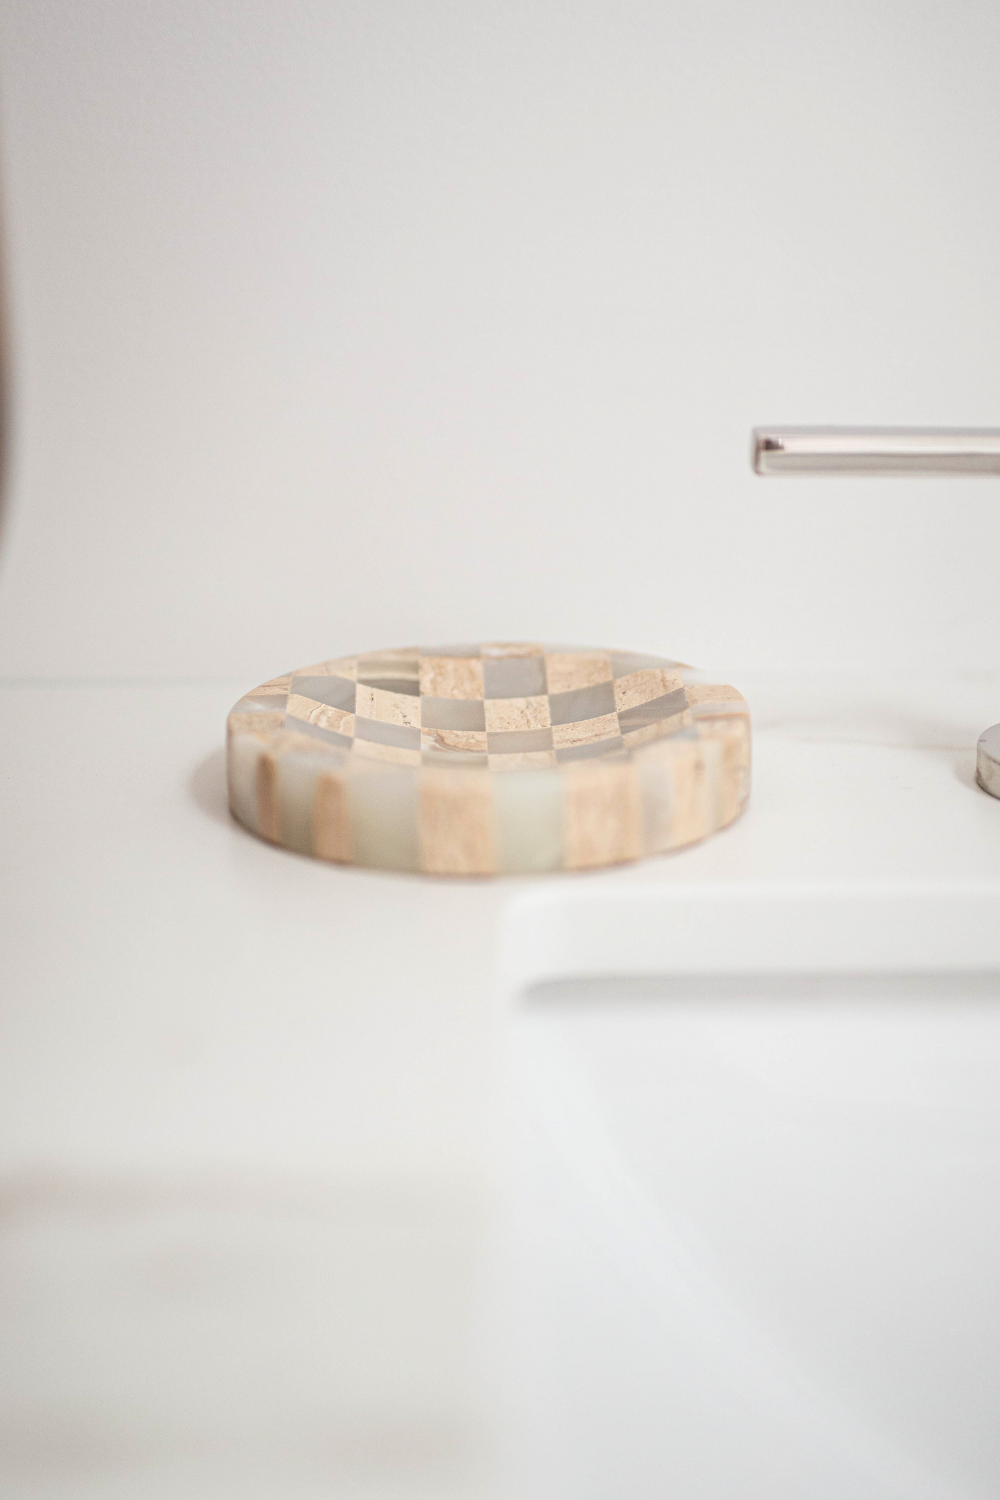 Checkered Travertine & Marble Soap Dish - Luxe B Co